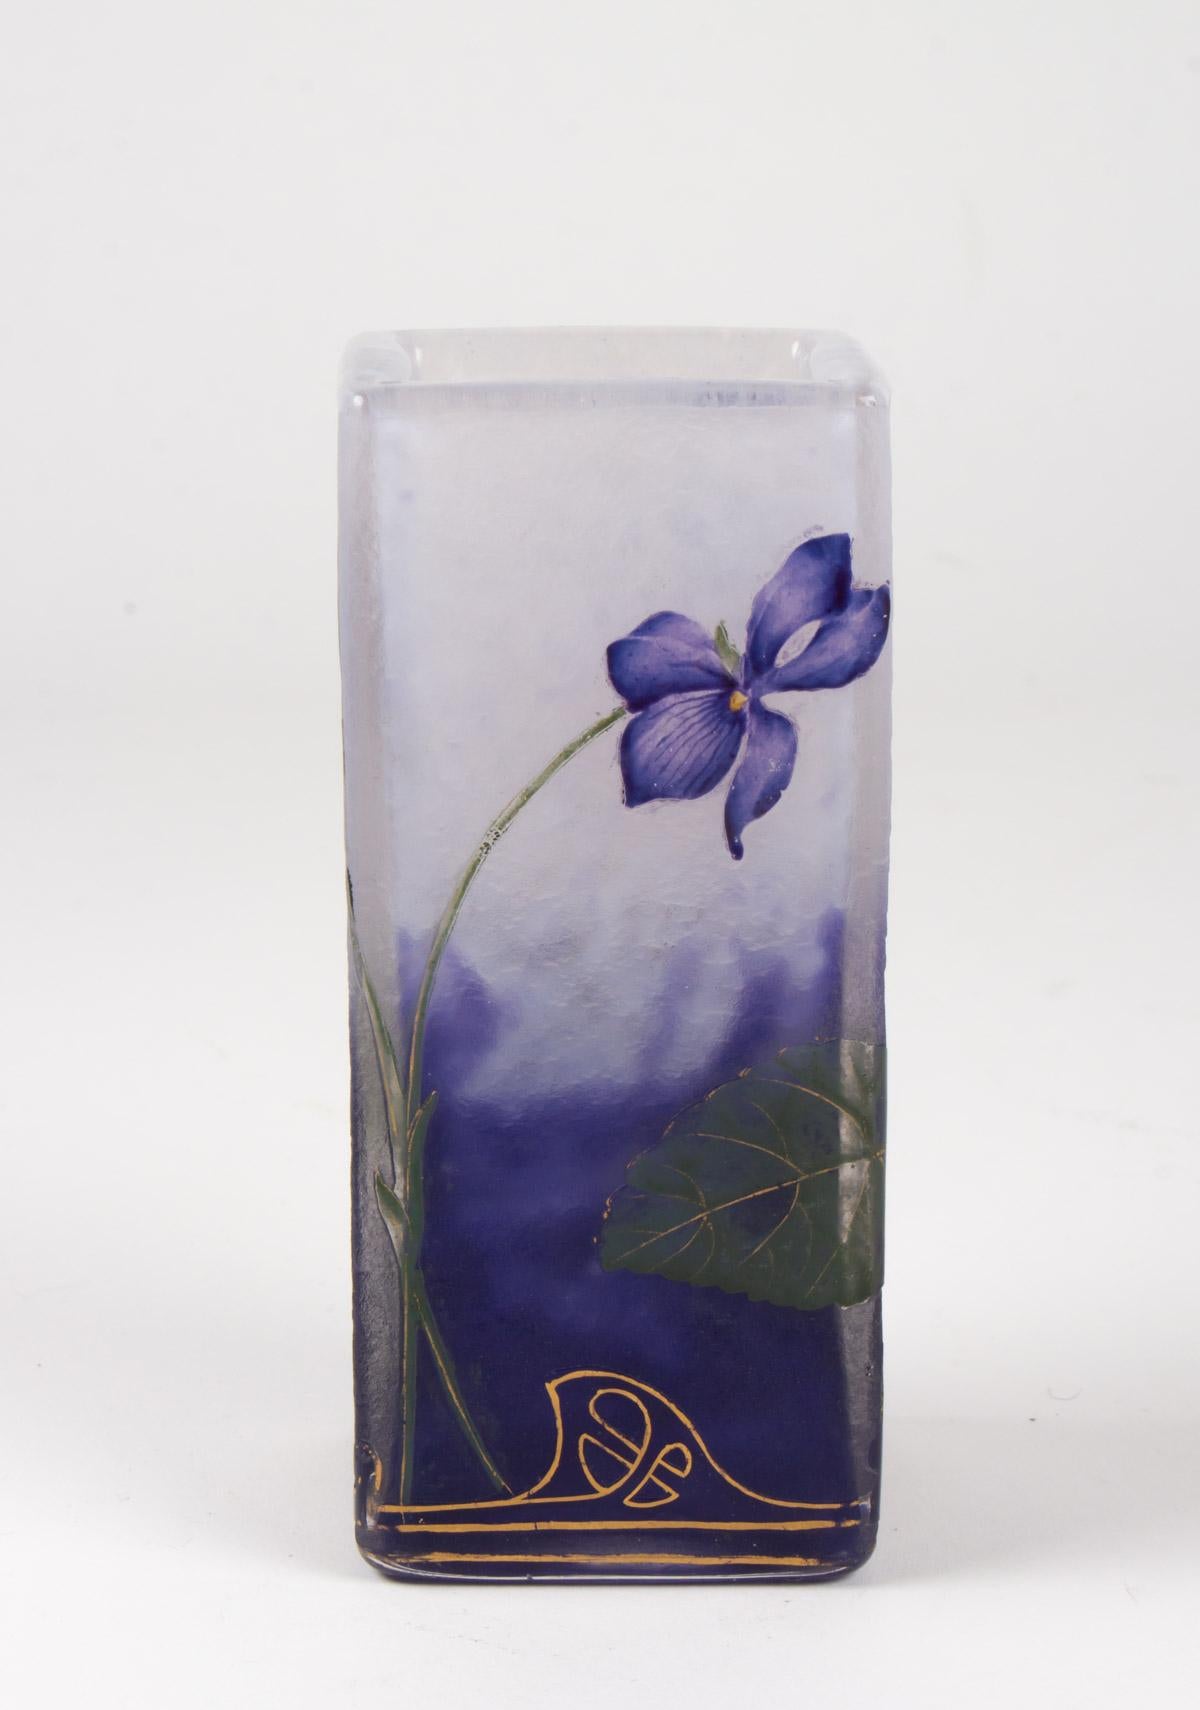 Daum, Nancy, circa 1900, clear glass with fleecy white and violet inclusions, the exterior with all-round etched violet motifs decorated in coloured enamel and gold, Gold signature Daum Nancy with Cross of Lorraineunder the base , height 12.